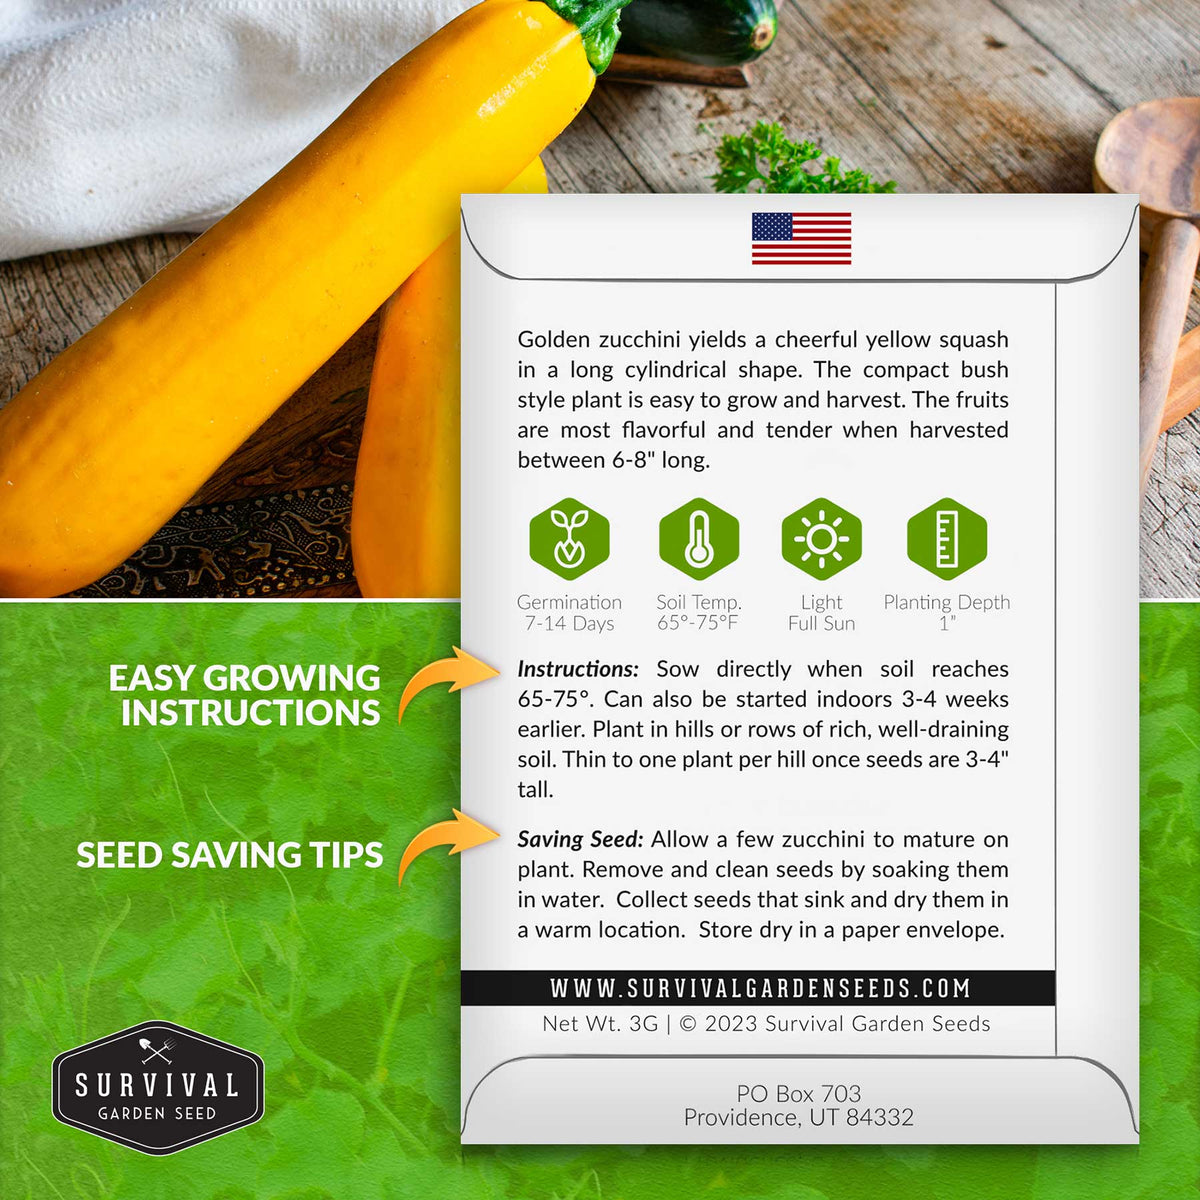 Golden zucchini seed planting instructions